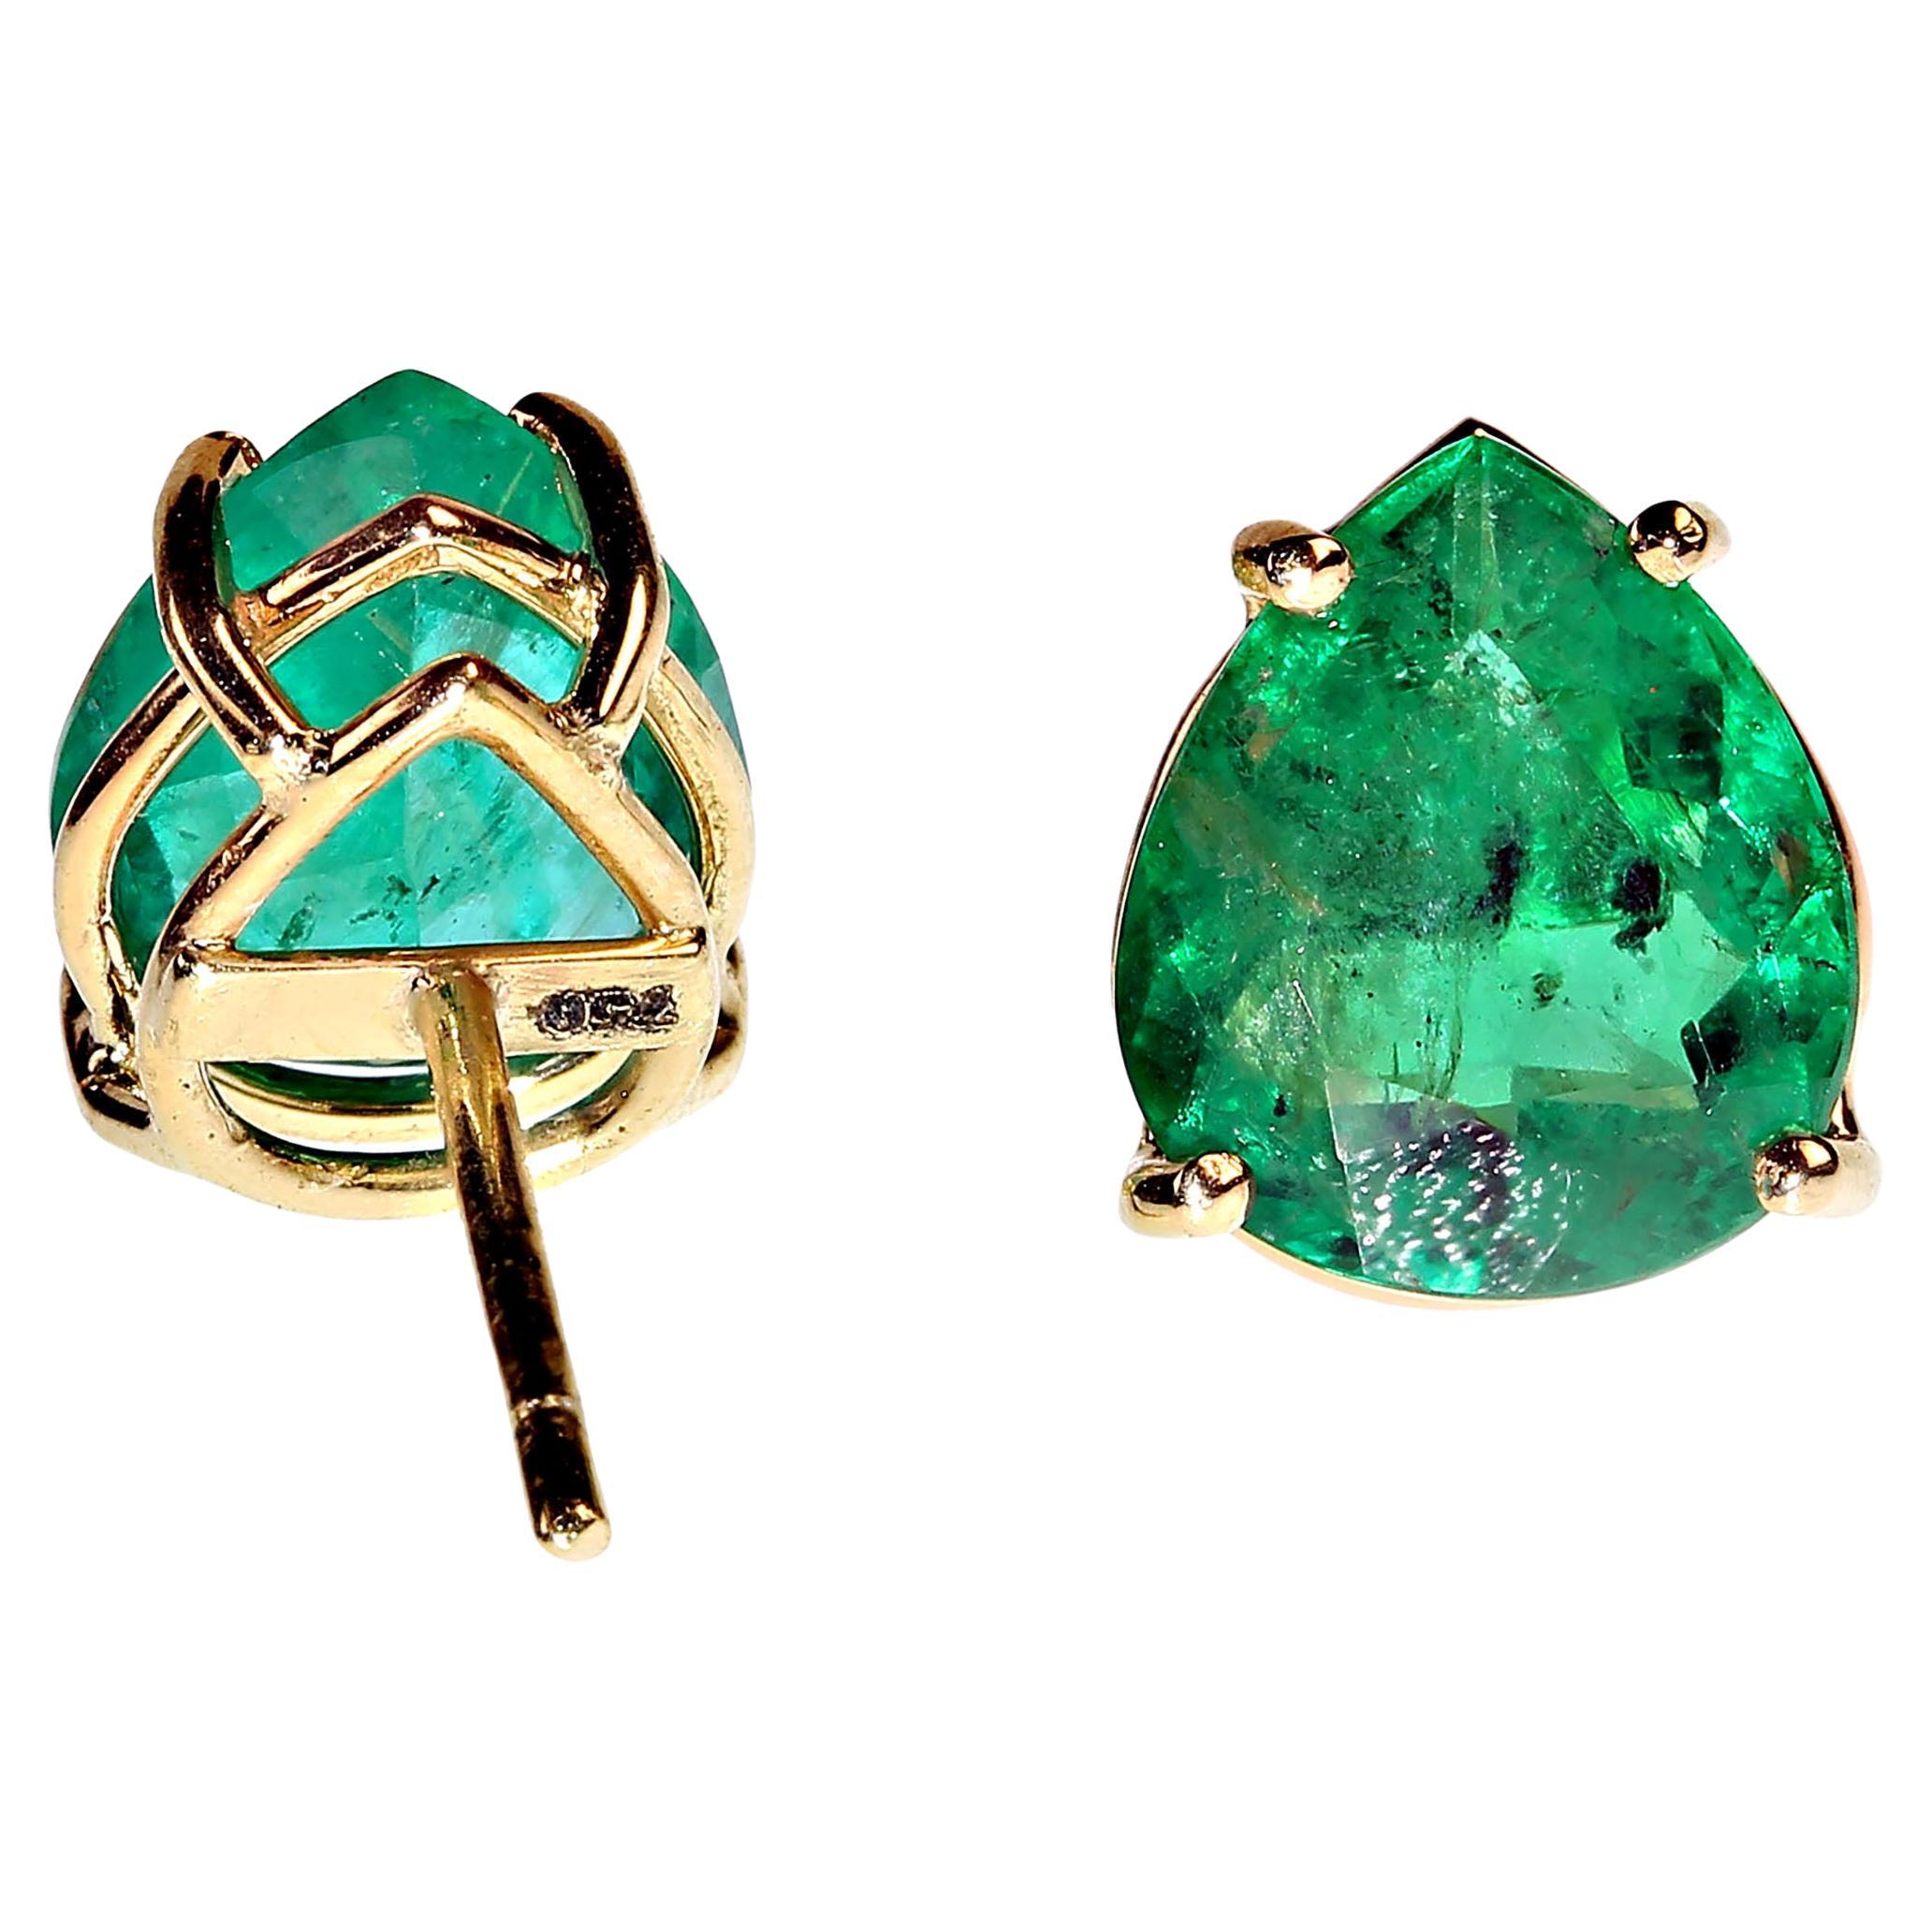 AJD Awesomely Elegant Emerald Earrings in 18K Yellow Gold